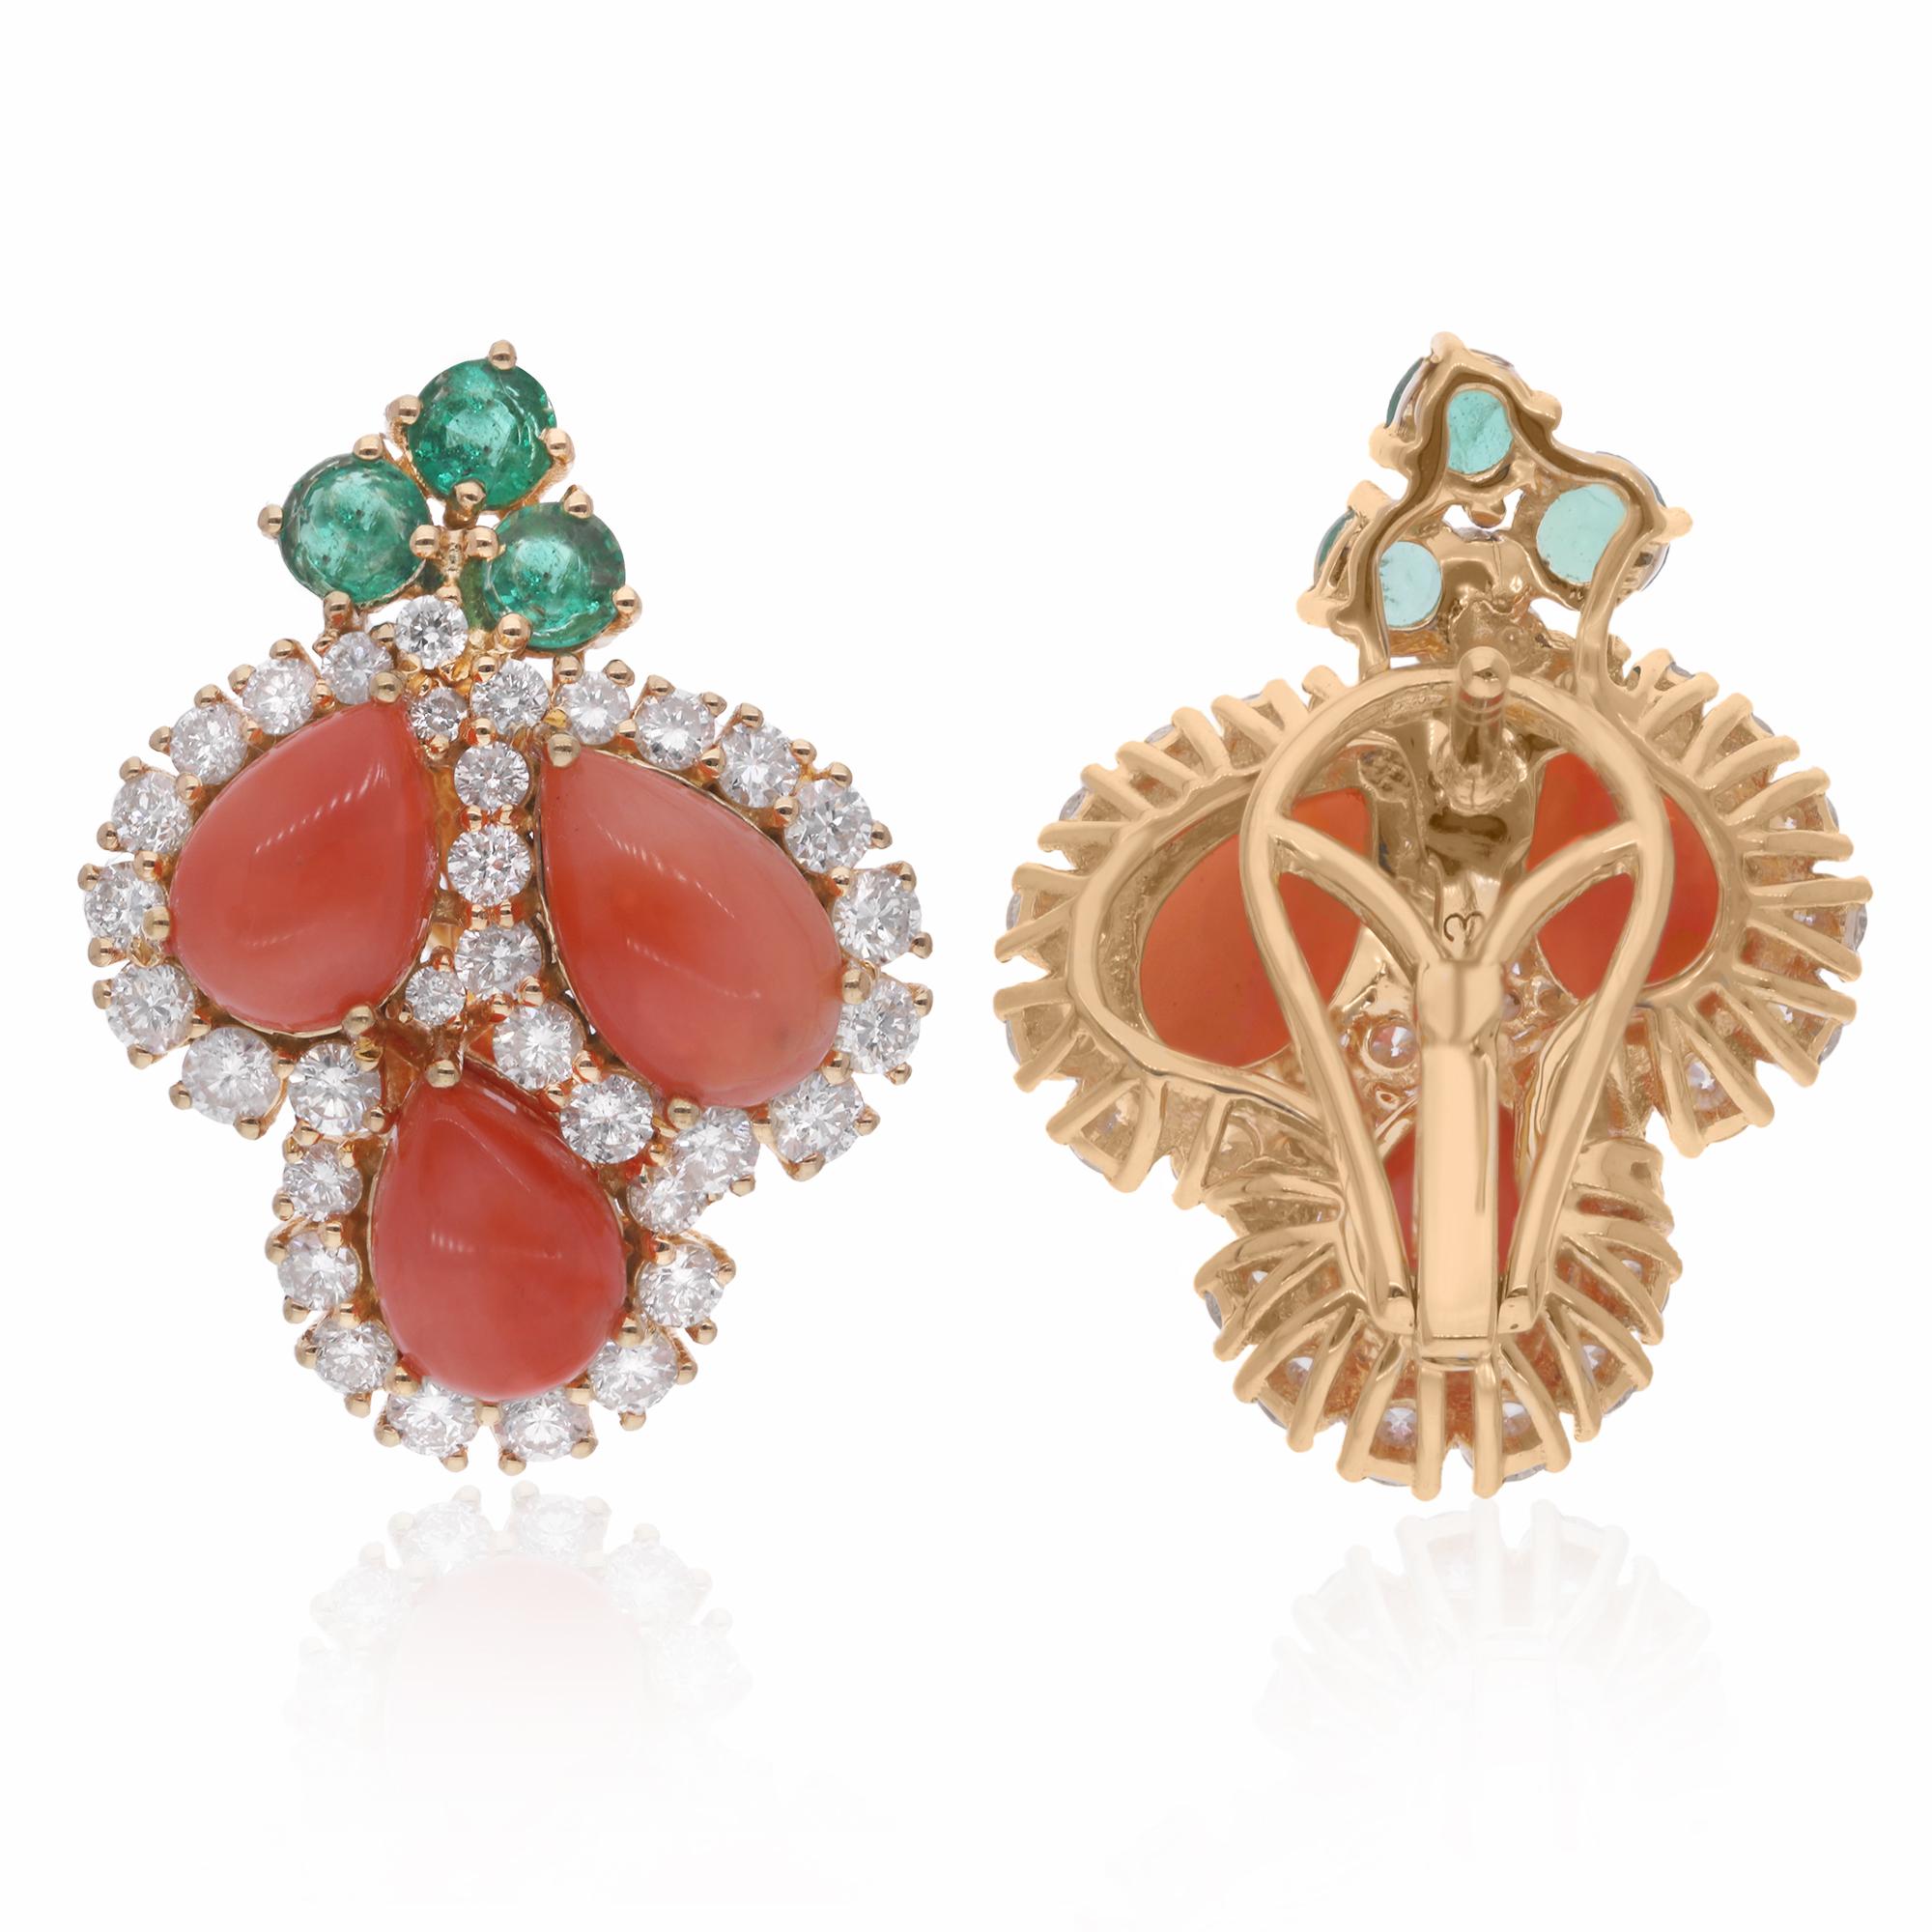 At the heart of these exquisite earrings sit pear-shaped coral gemstones, evoking the natural elegance of the sea. The rich, warm hue of the coral gemstones radiates a sense of vitality and energy, while the pear shape adds a touch of femininity and